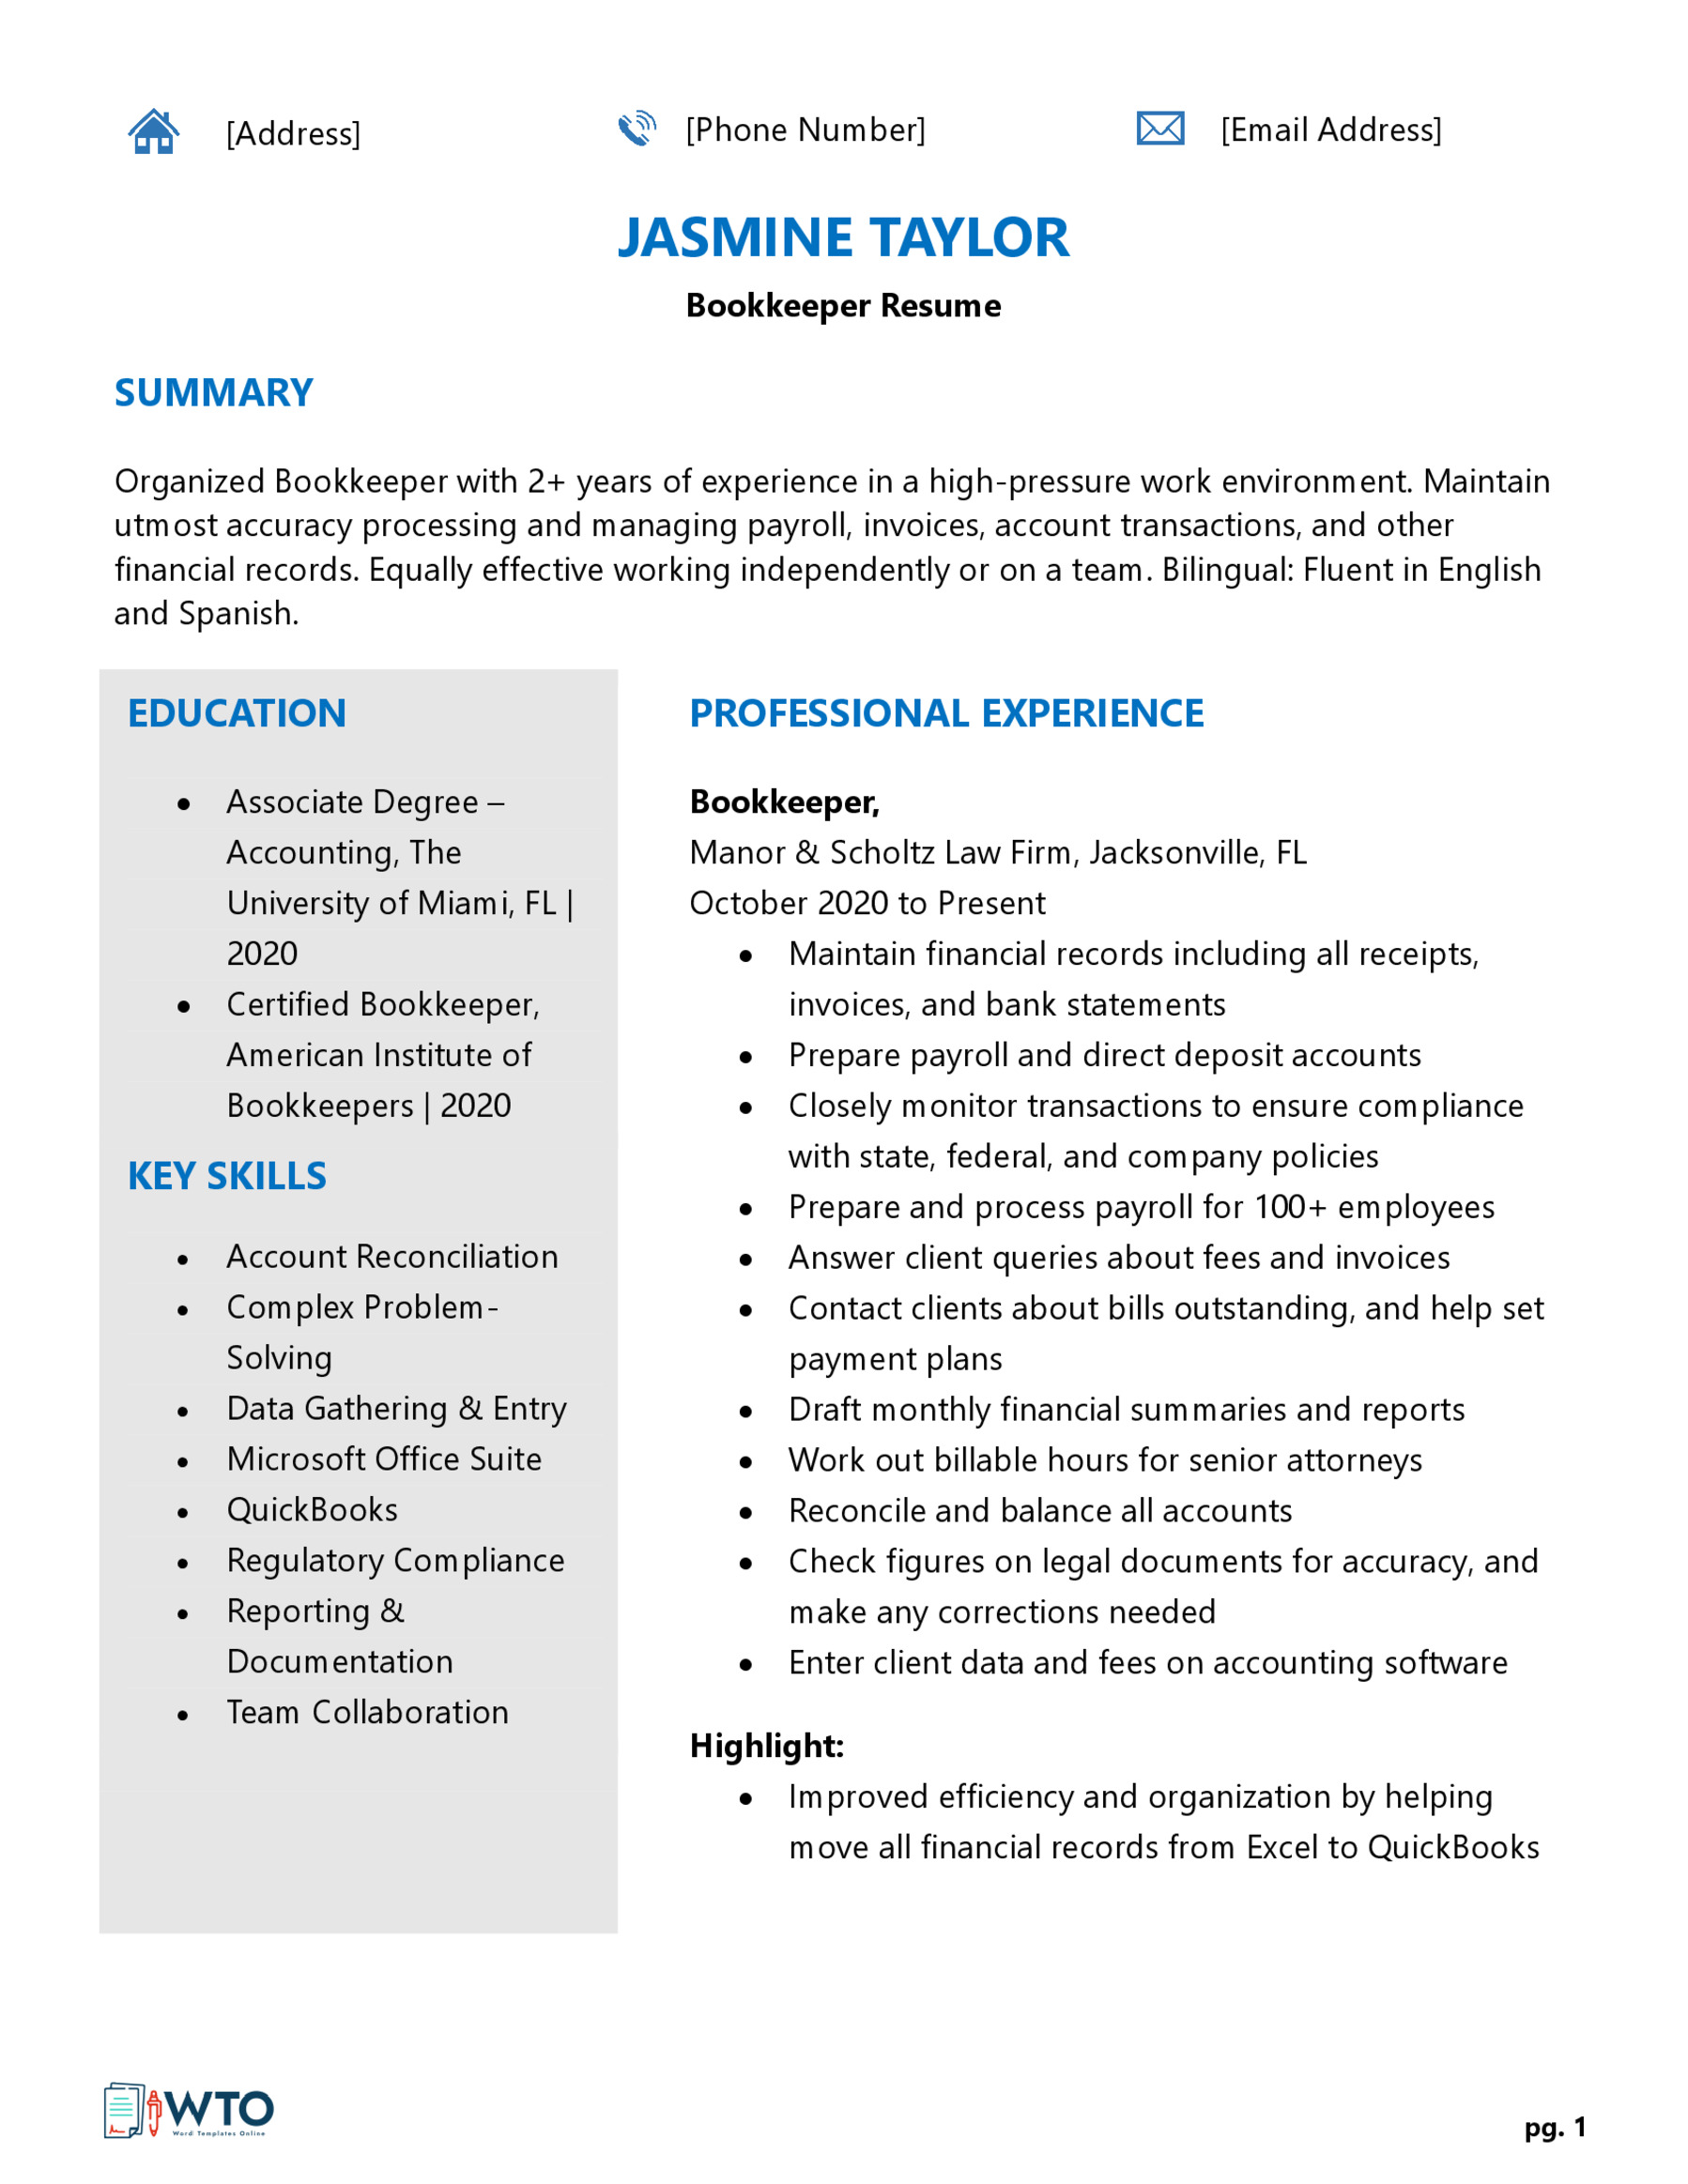 Bookkeeper Resume Template - Customizable Format